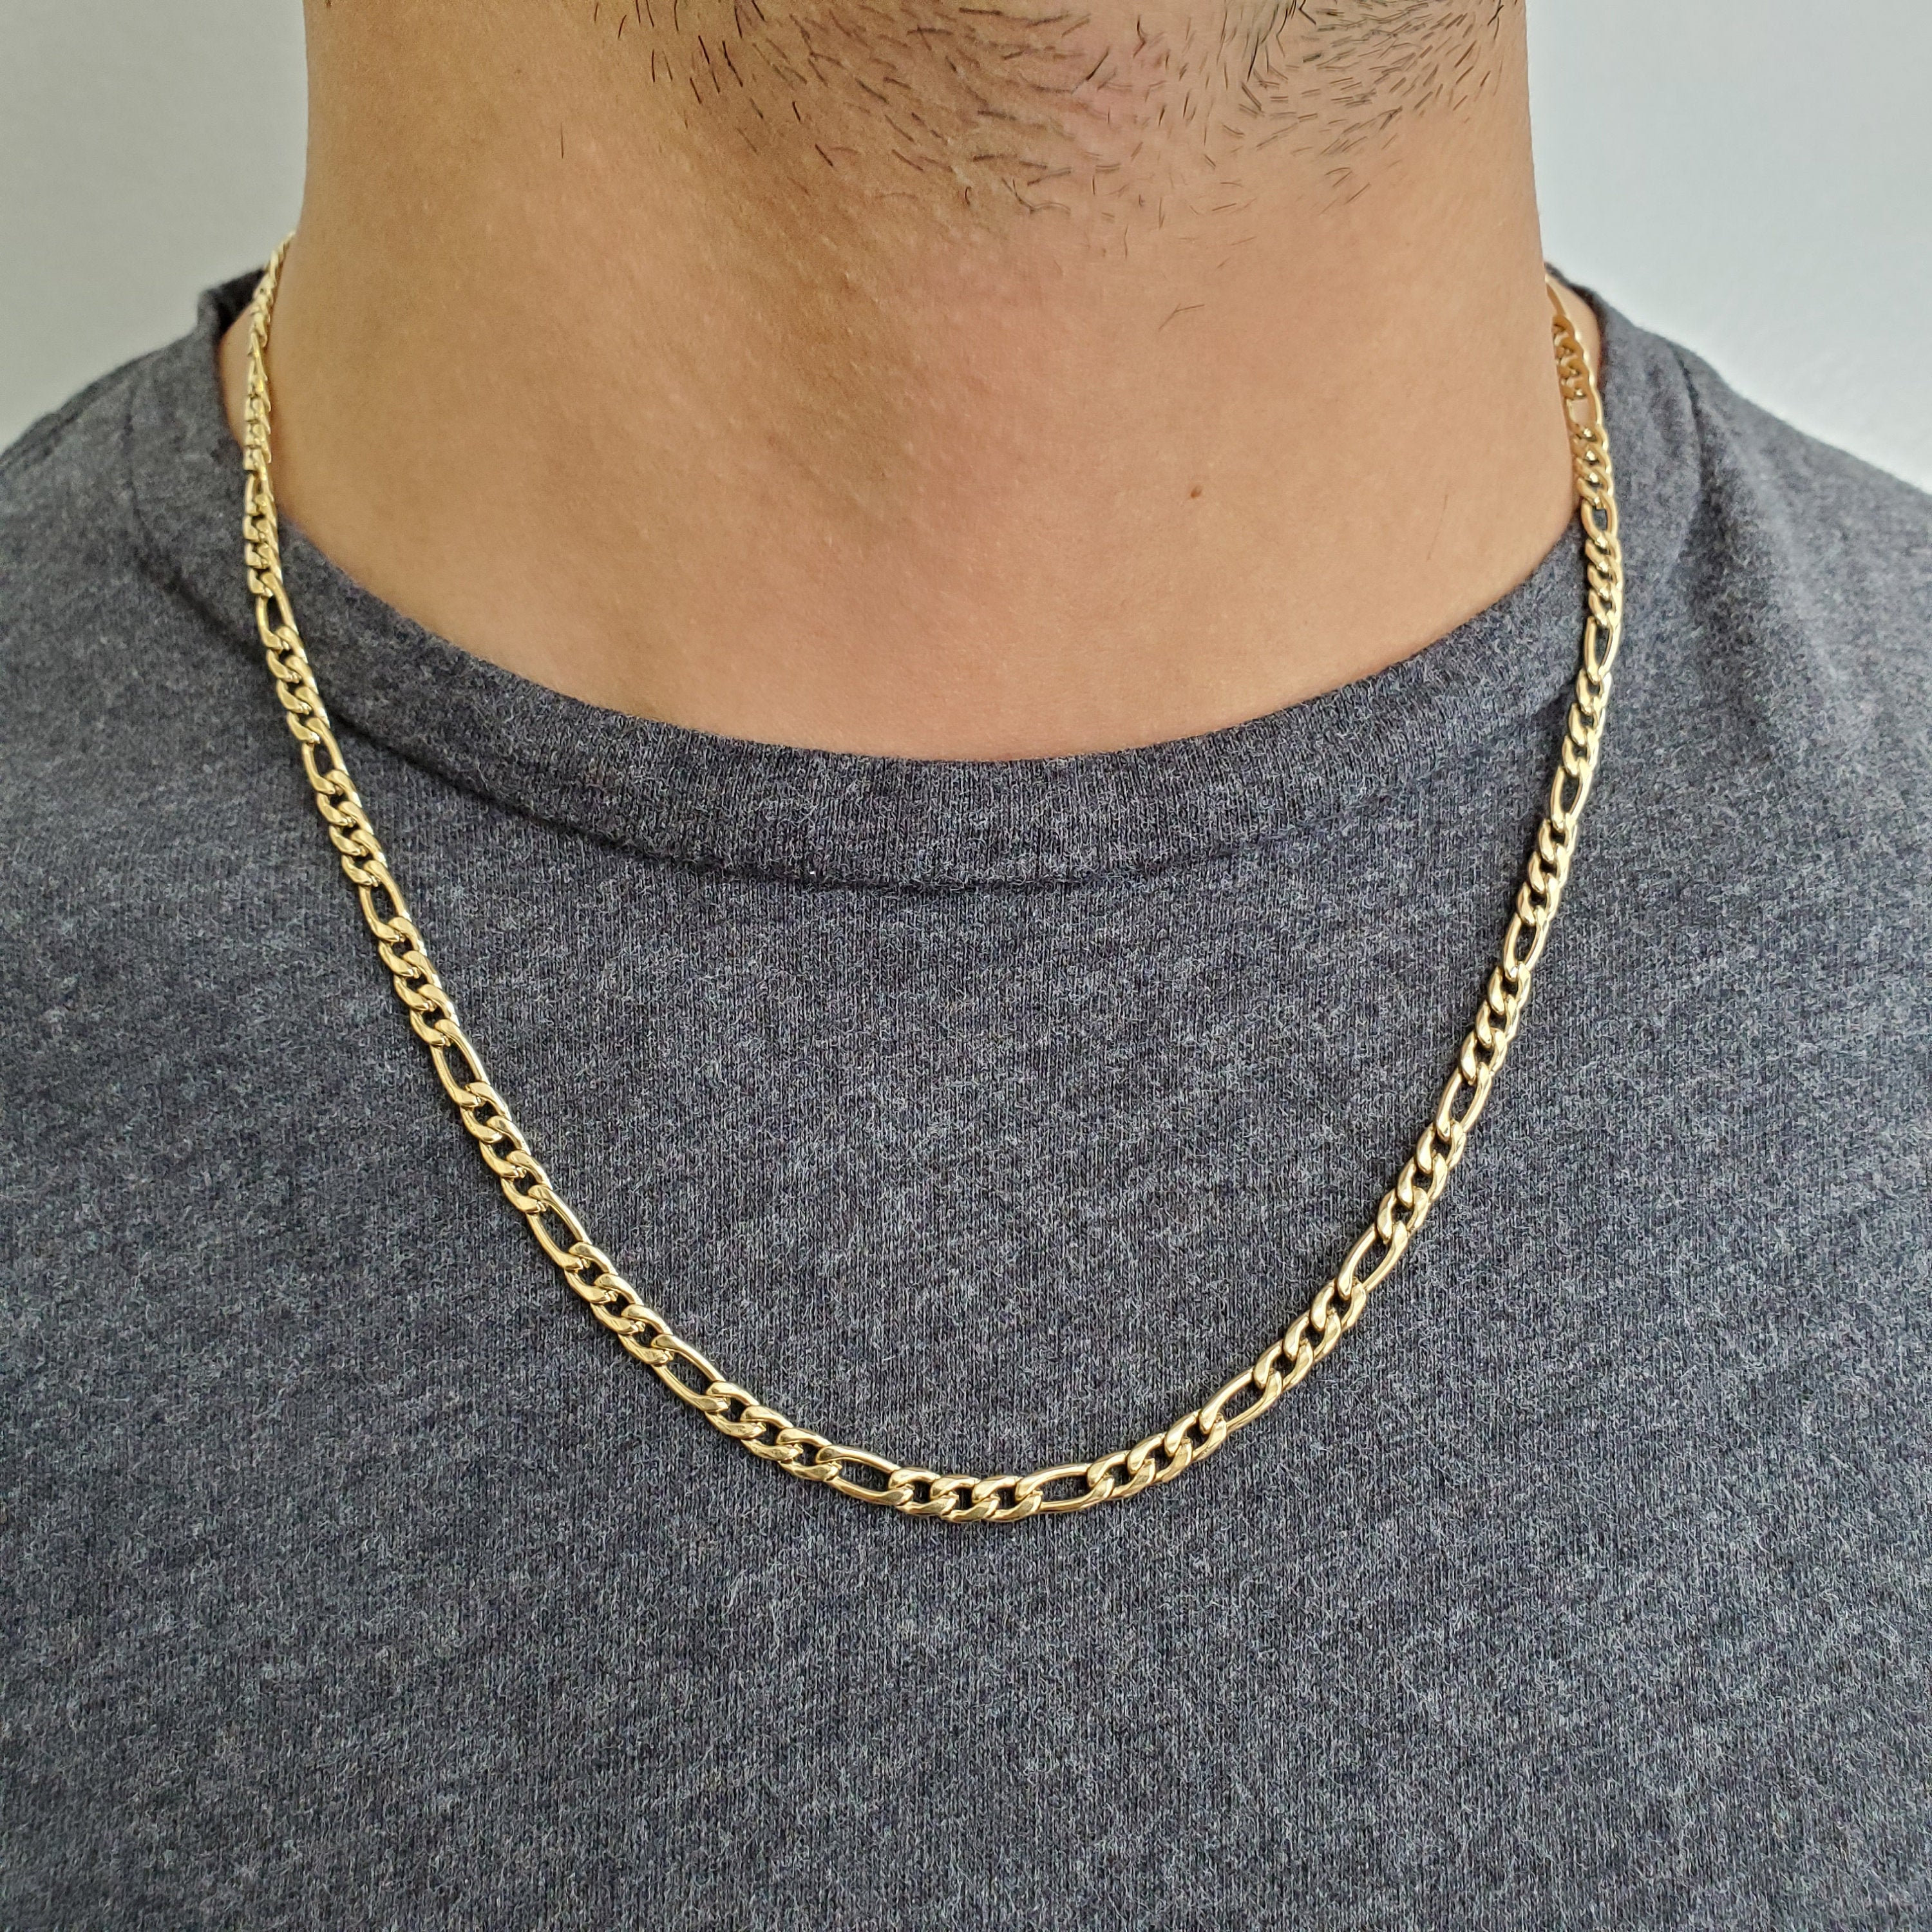 18-30 Fashion Jewelry ChainsHouse 3-13mm Figaro Chain Necklace Stainless Steel/18K Gold Plated Figaro Link Chain for Men Women